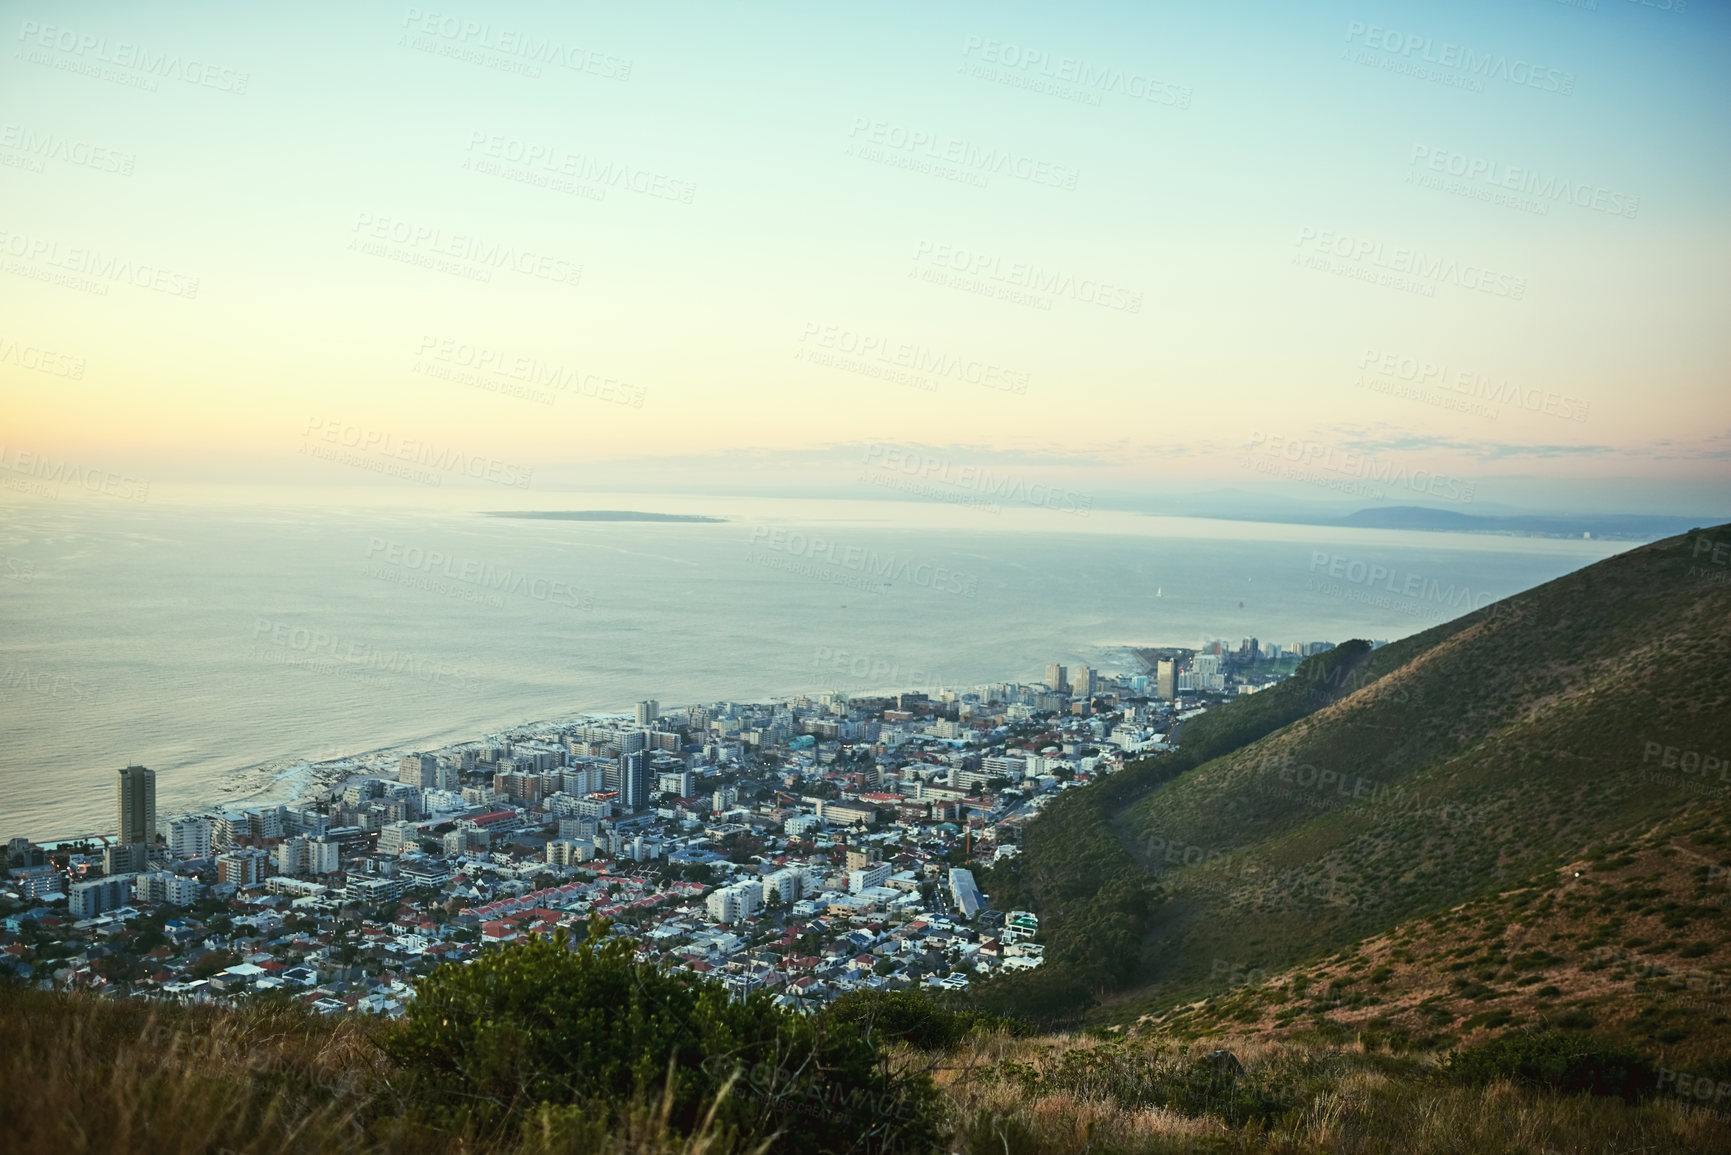 Buy stock photo Shot of the view of a city along the ocean from a mountain peak